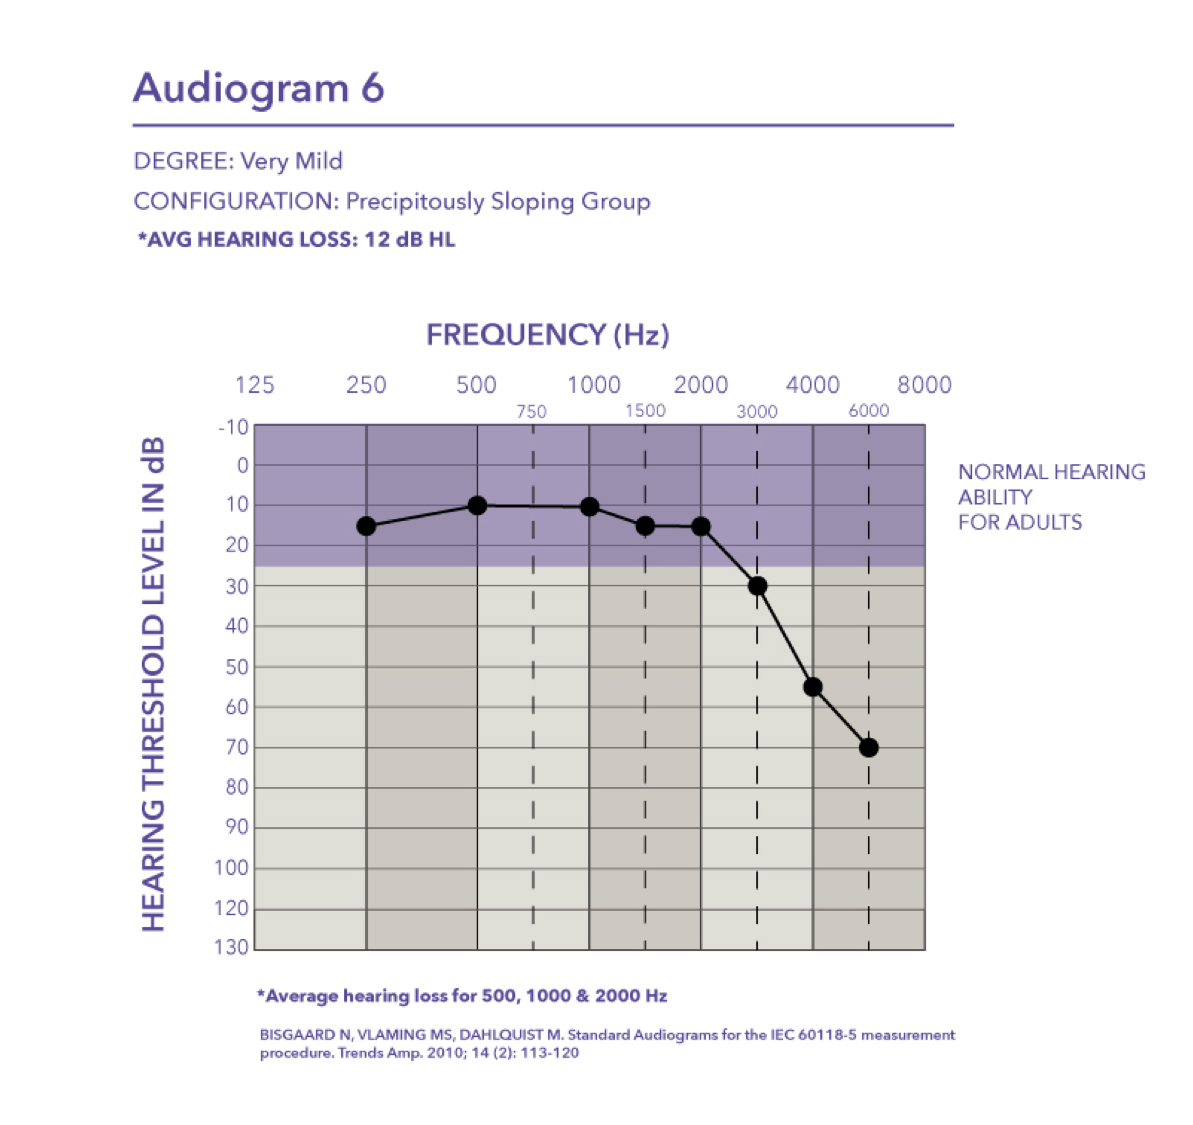 Very mild hearing loss with a pure tone average of 12 dB